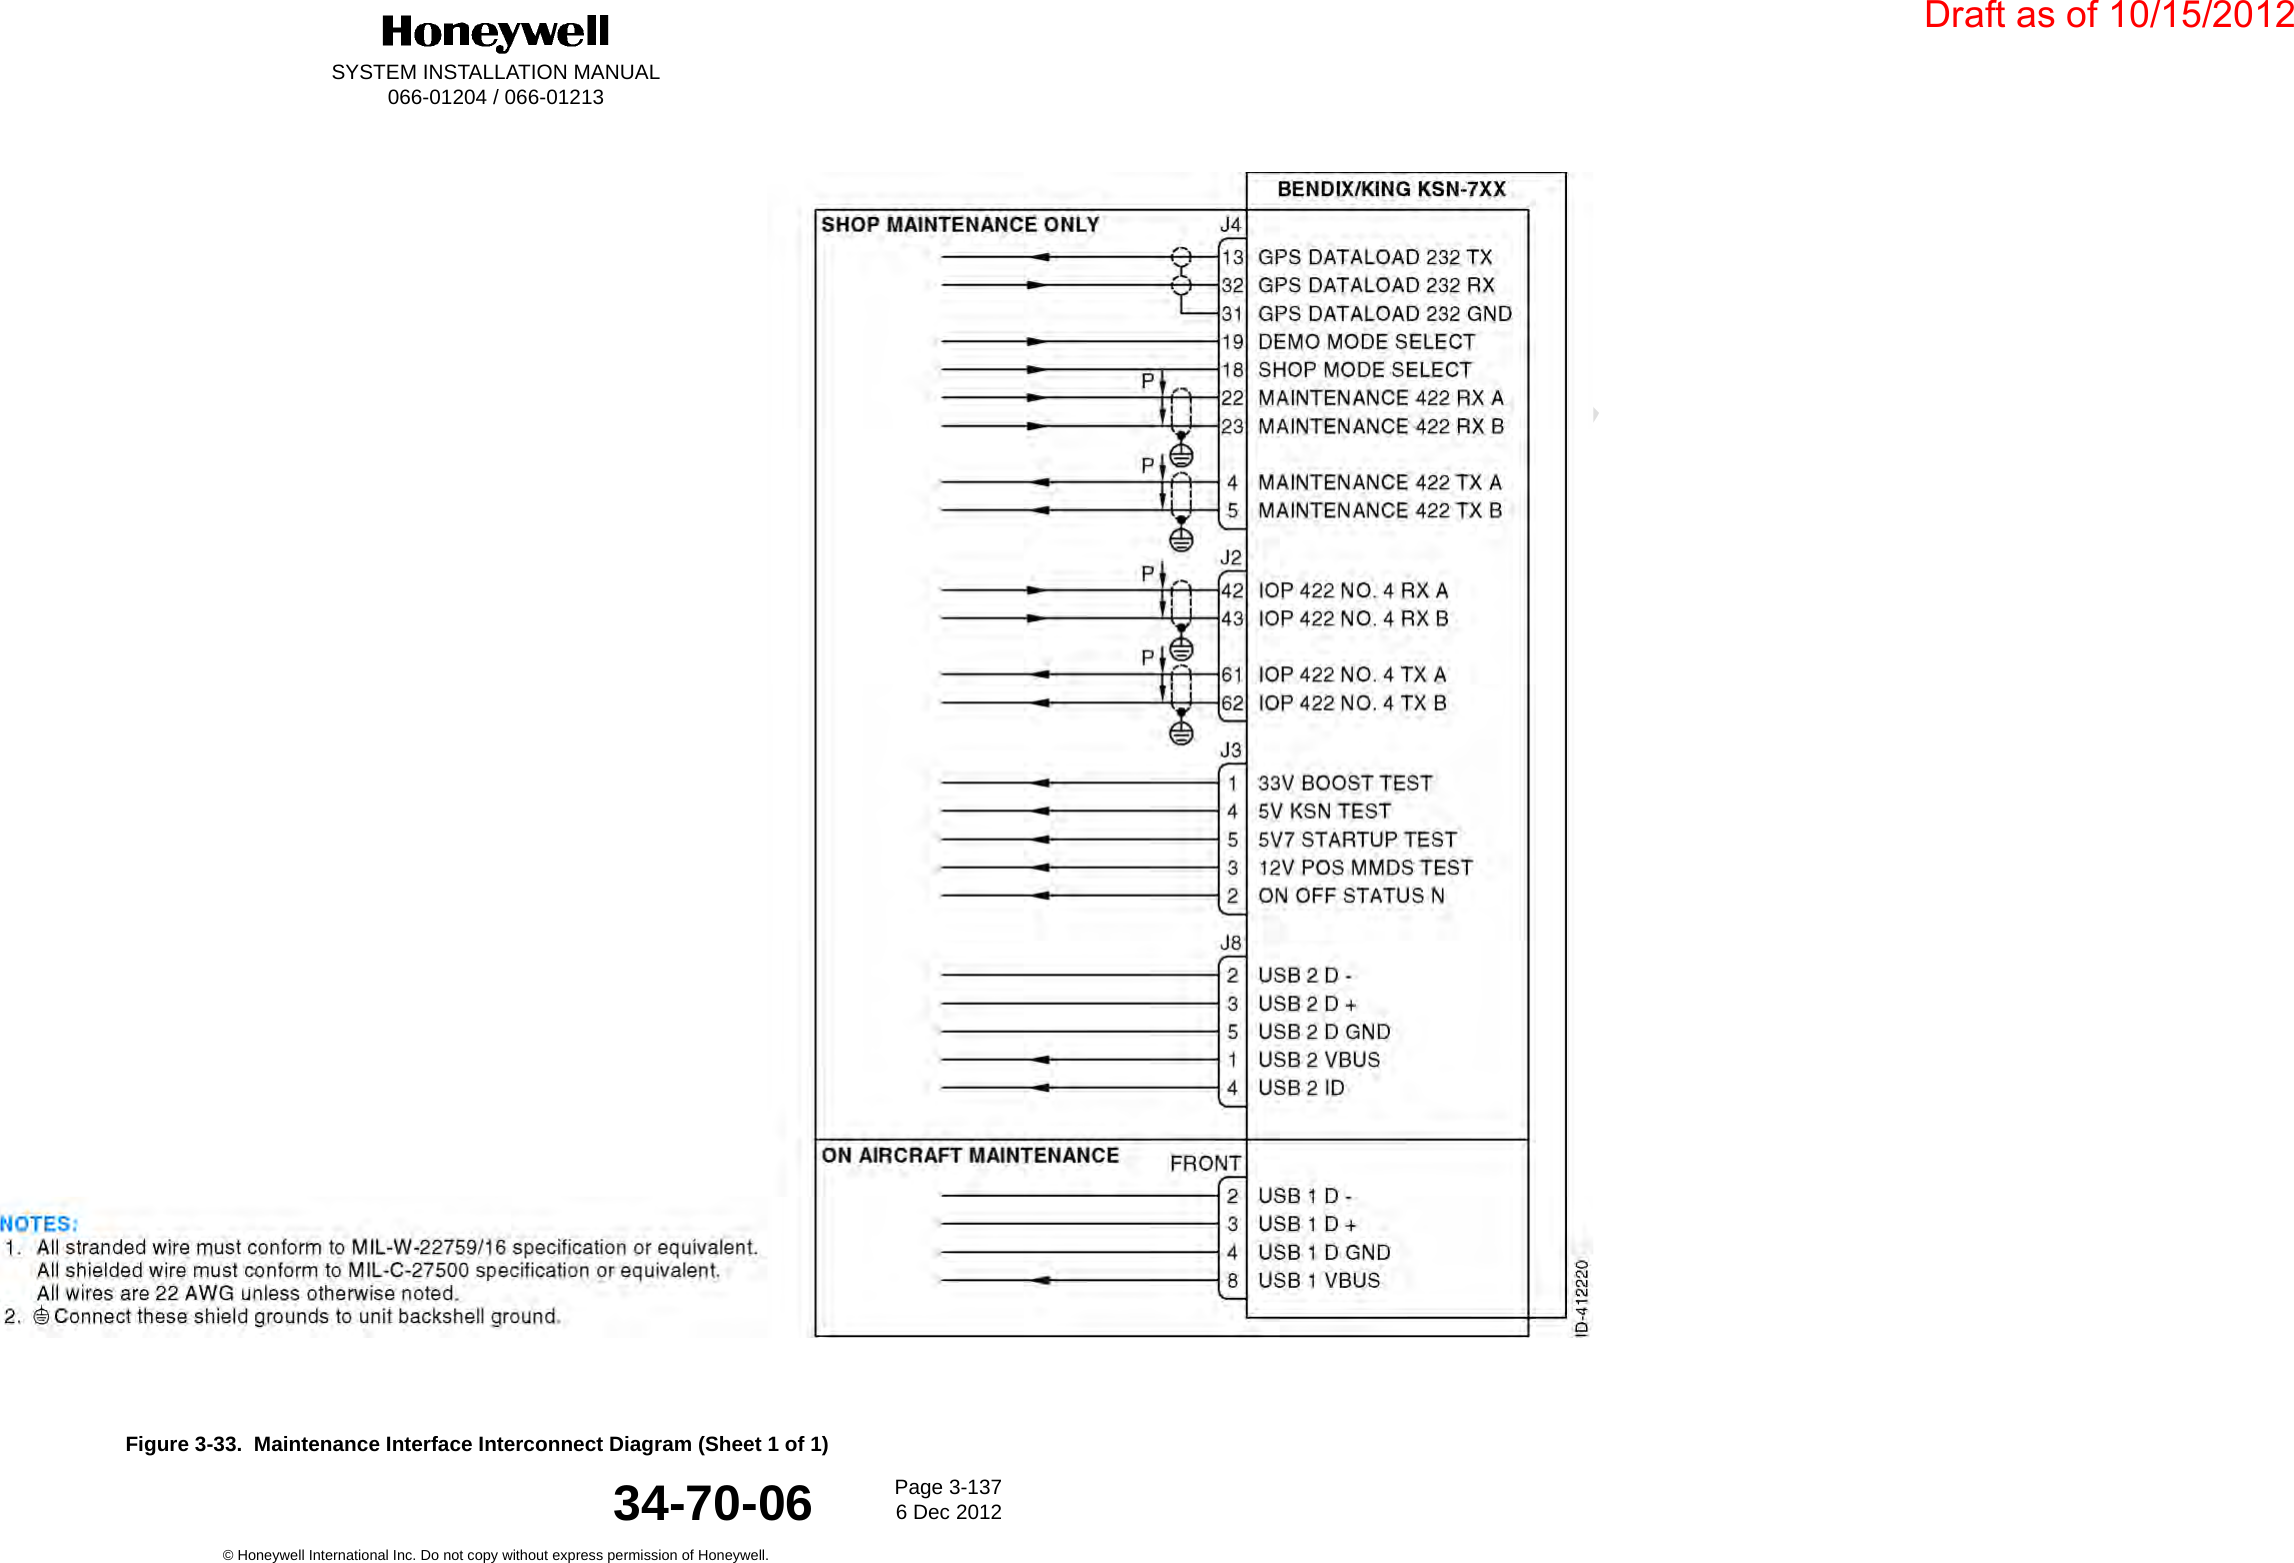 DraftSYSTEM INSTALLATION MANUAL066-01204 / 066-01213Page 3-1376 Dec 2012© Honeywell International Inc. Do not copy without express permission of Honeywell.34-70-06Figure 3-33.  Maintenance Interface Interconnect Diagram (Sheet 1 of 1)Draft as of 10/15/2012